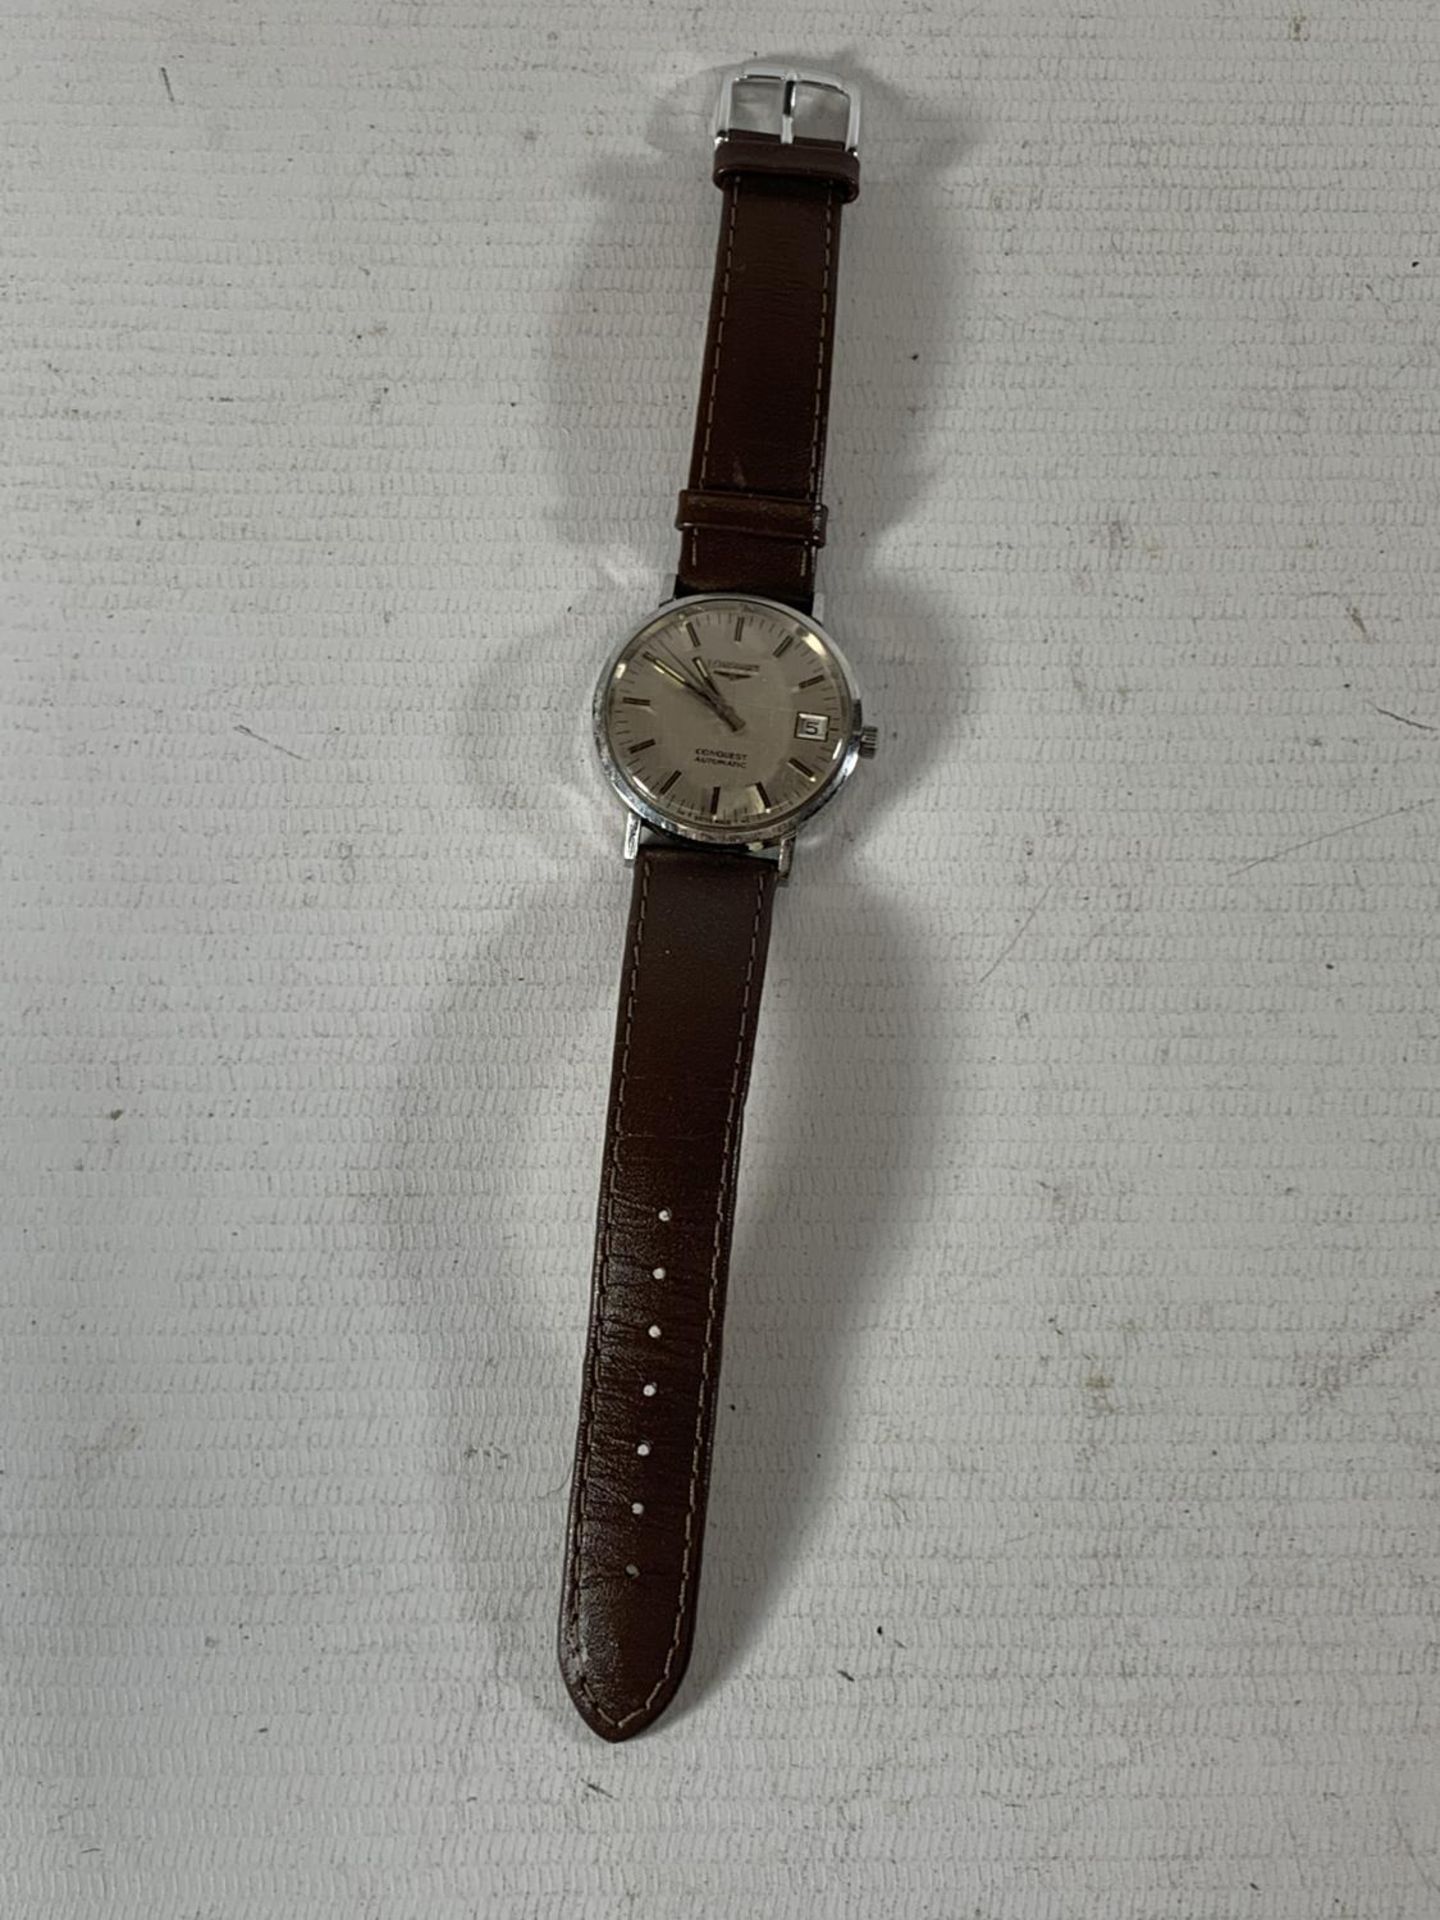 A VINTAGE LONGINES CONQUEST AUTOMATIC WRIST WATCH WITH LEATHER STRAP SEEN WORKING BUT NO WARRANTY - Bild 2 aus 4